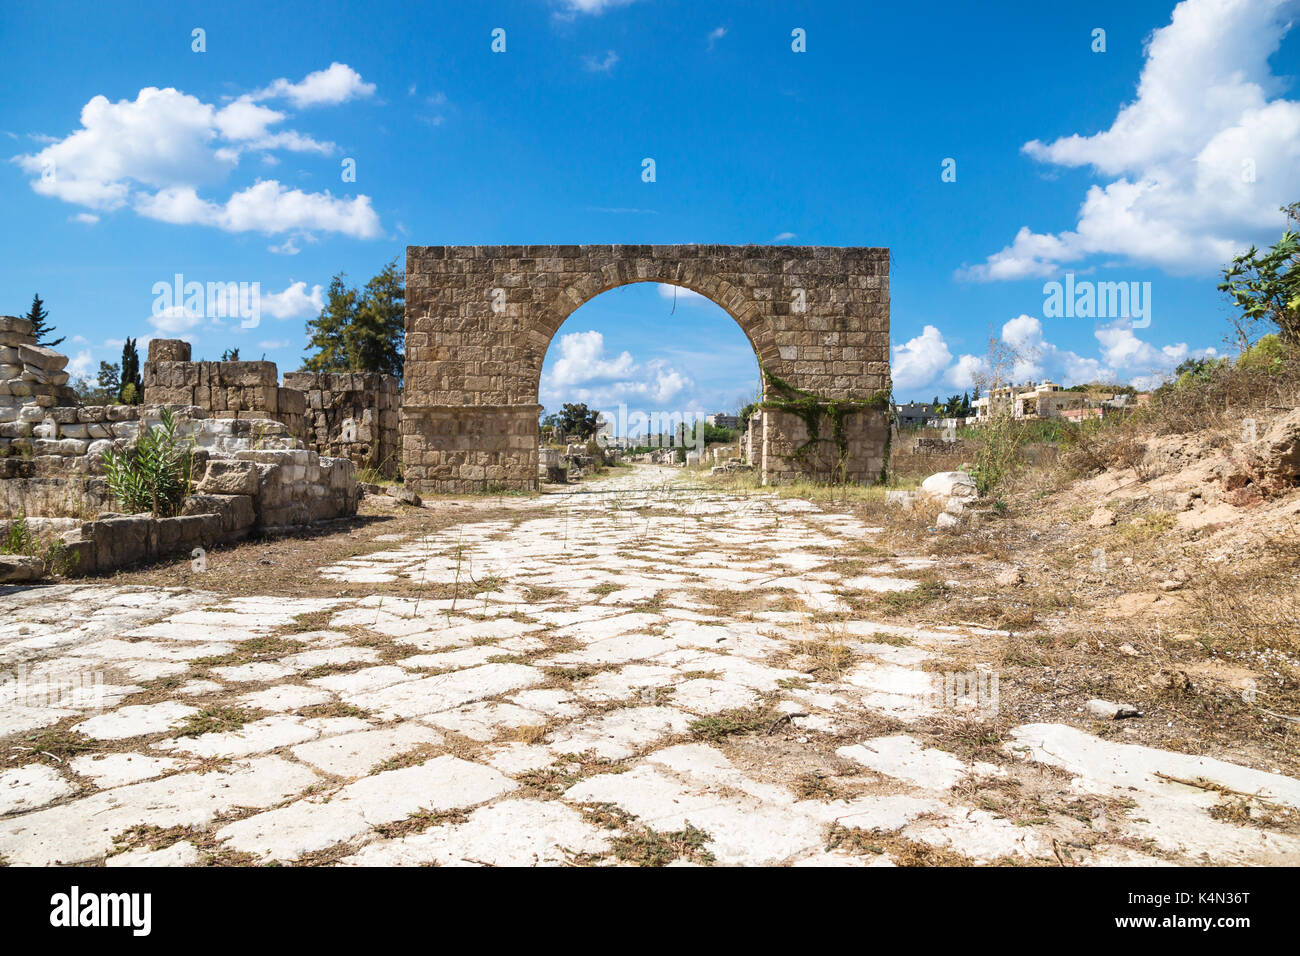 Byzantine road with triumph arch with blue sky in ruins of Tyre, Lebanon Stock Photo